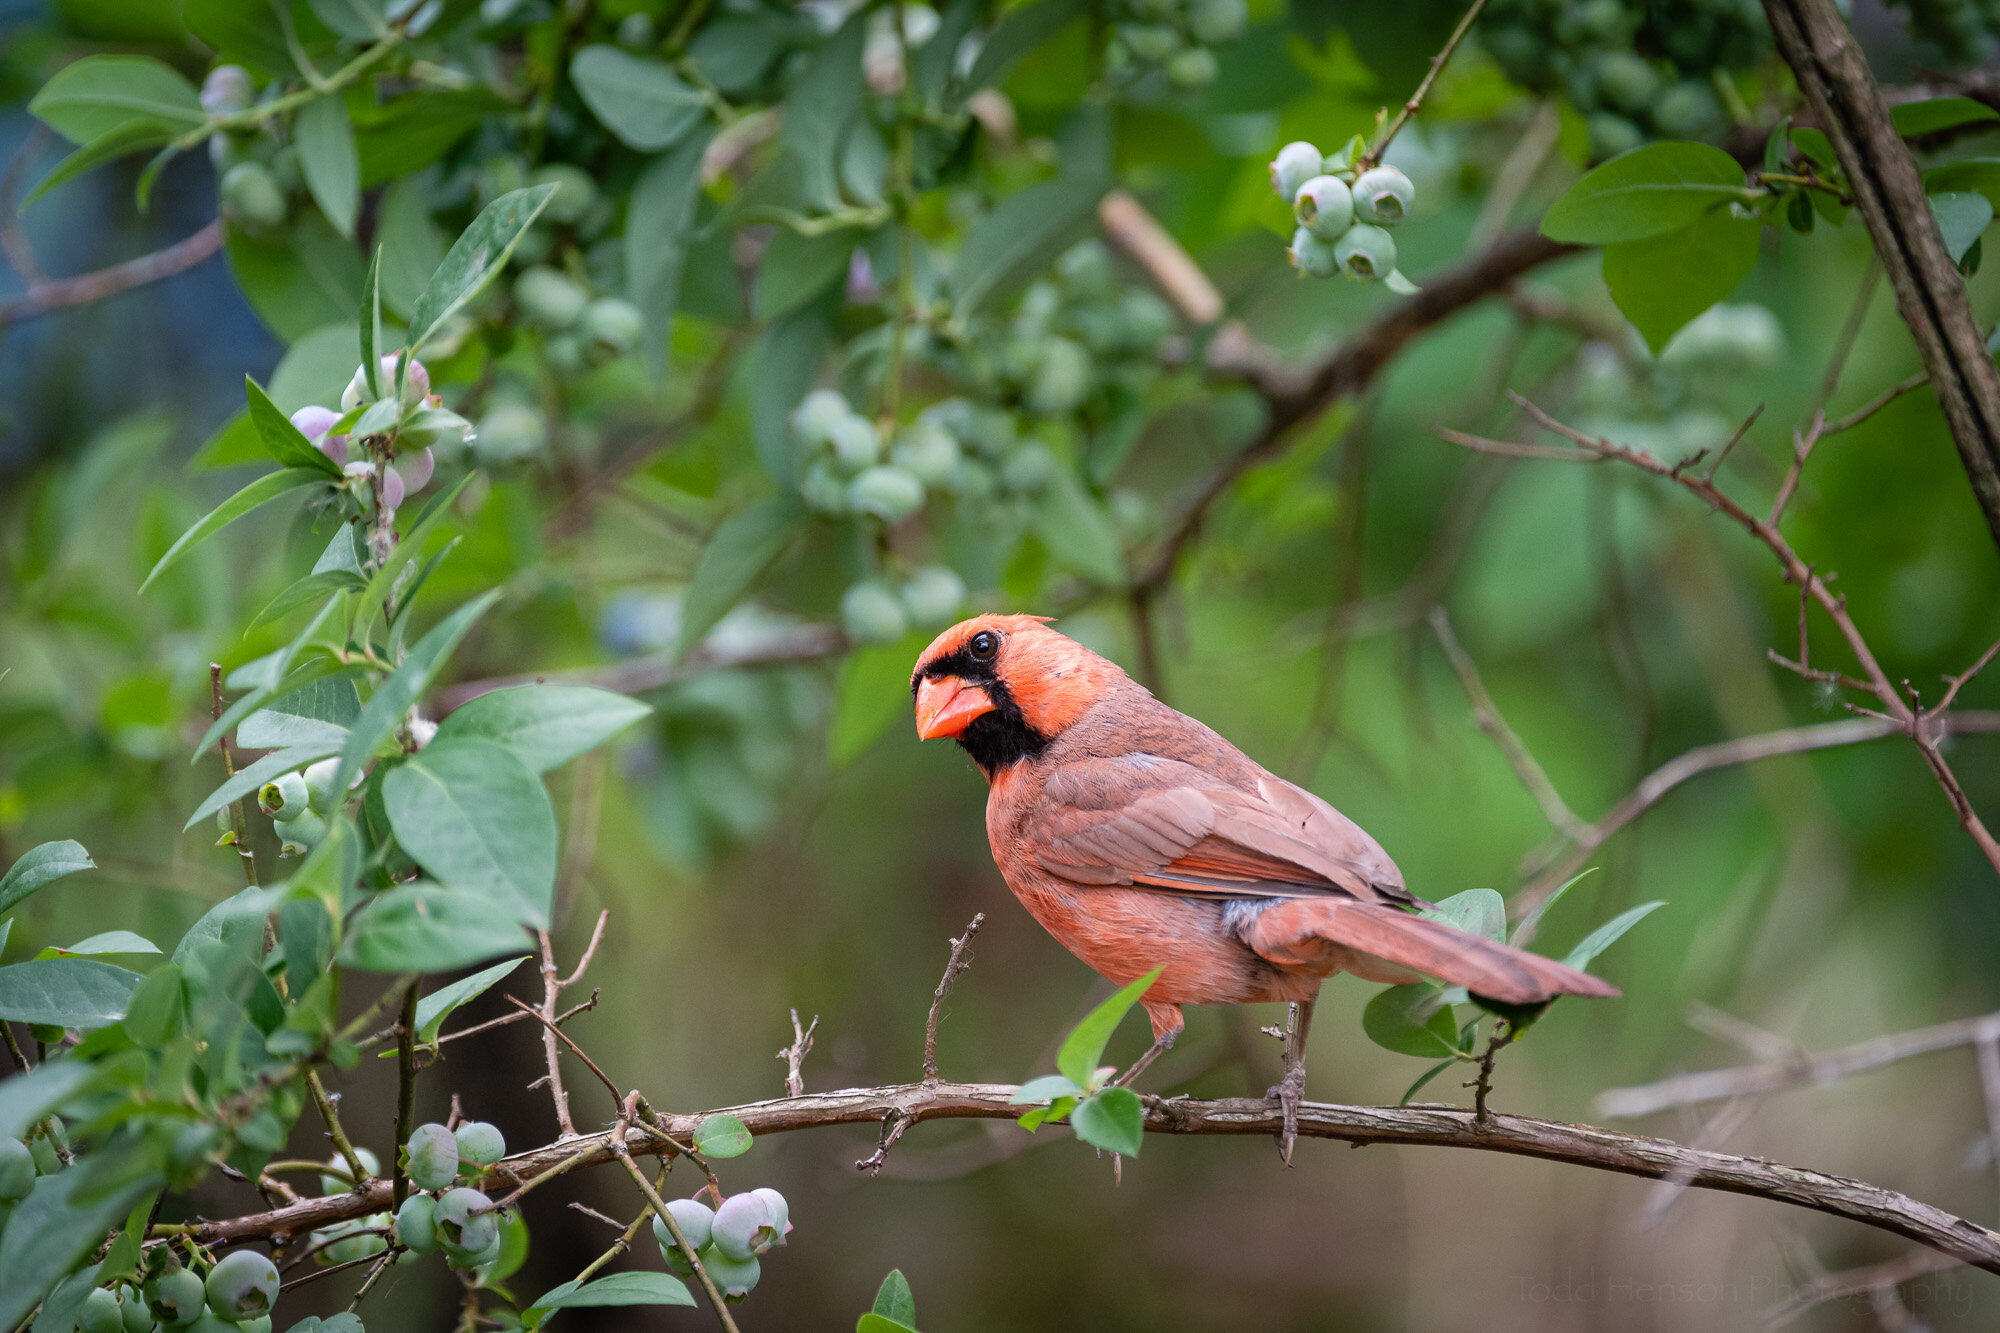 Male Northern Cardinal and Blueberries